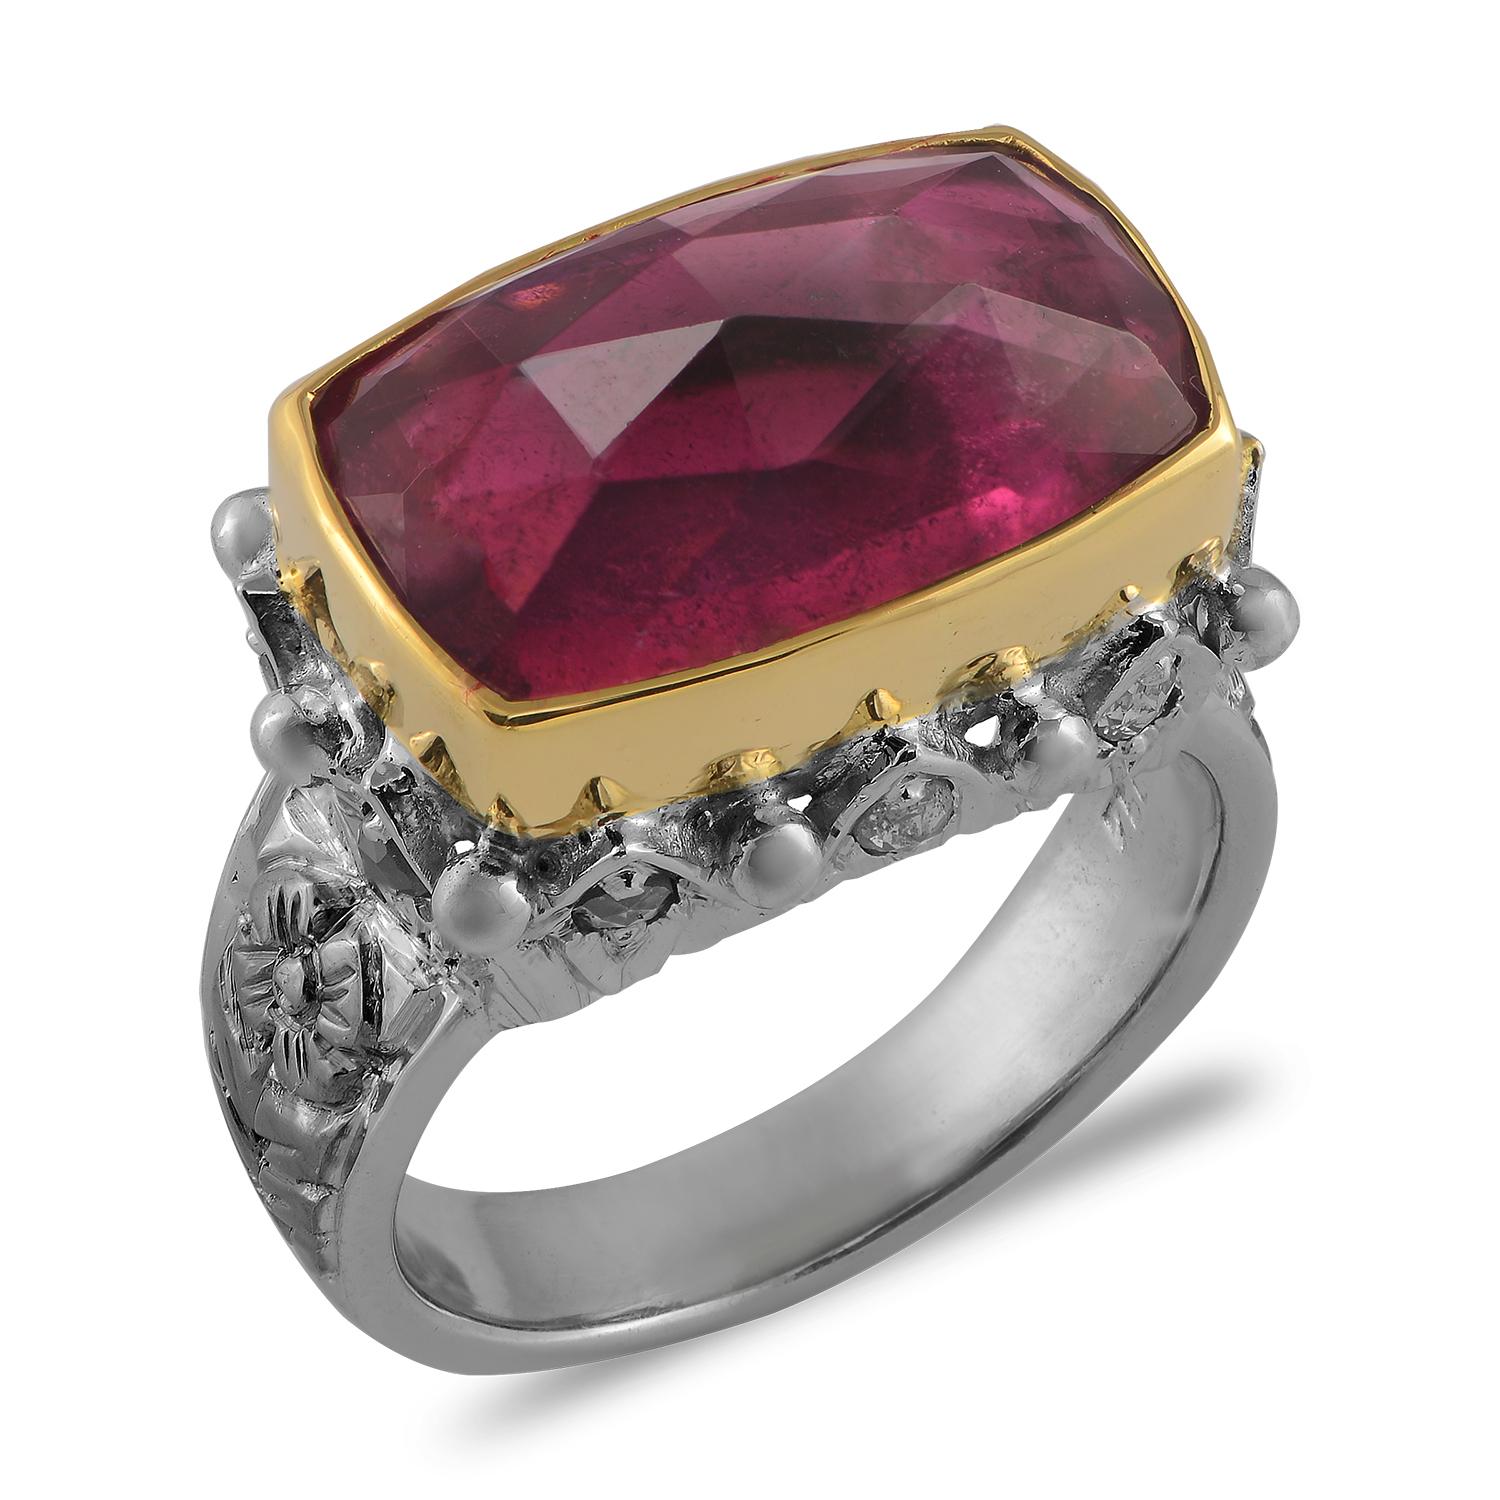 

This divine one of a kind Tourmaline Diamond 18 Karat Gold Cocktail Ring,  has been handmade in our workshops. It features a 12.35ct pink tourmaline, surrounded by rose cut diamonds. The tourmaline is set in 18 karat gold and the shank is made in